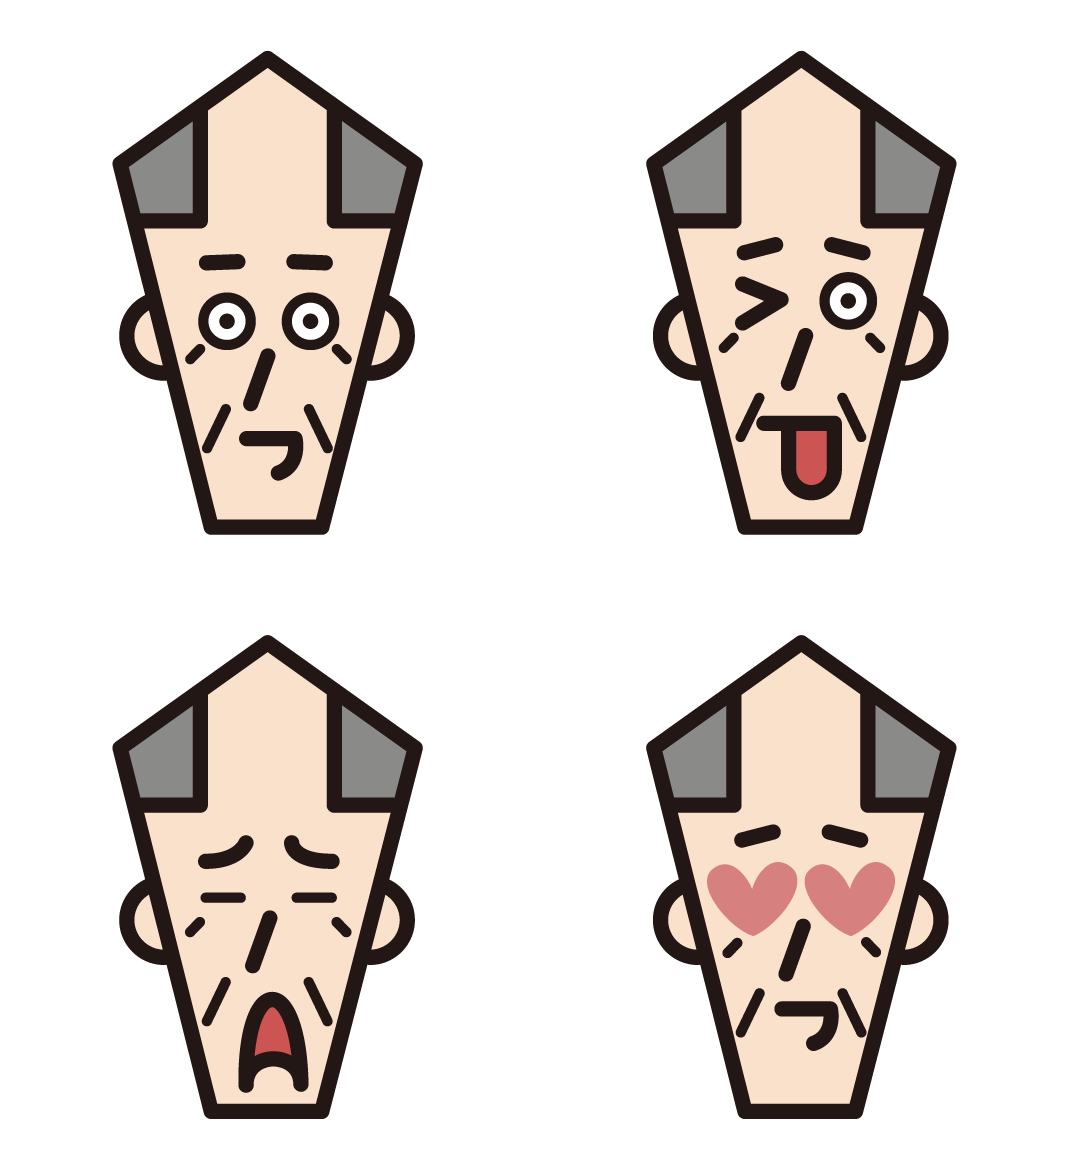 4 illustrations of the various expressions of the old man